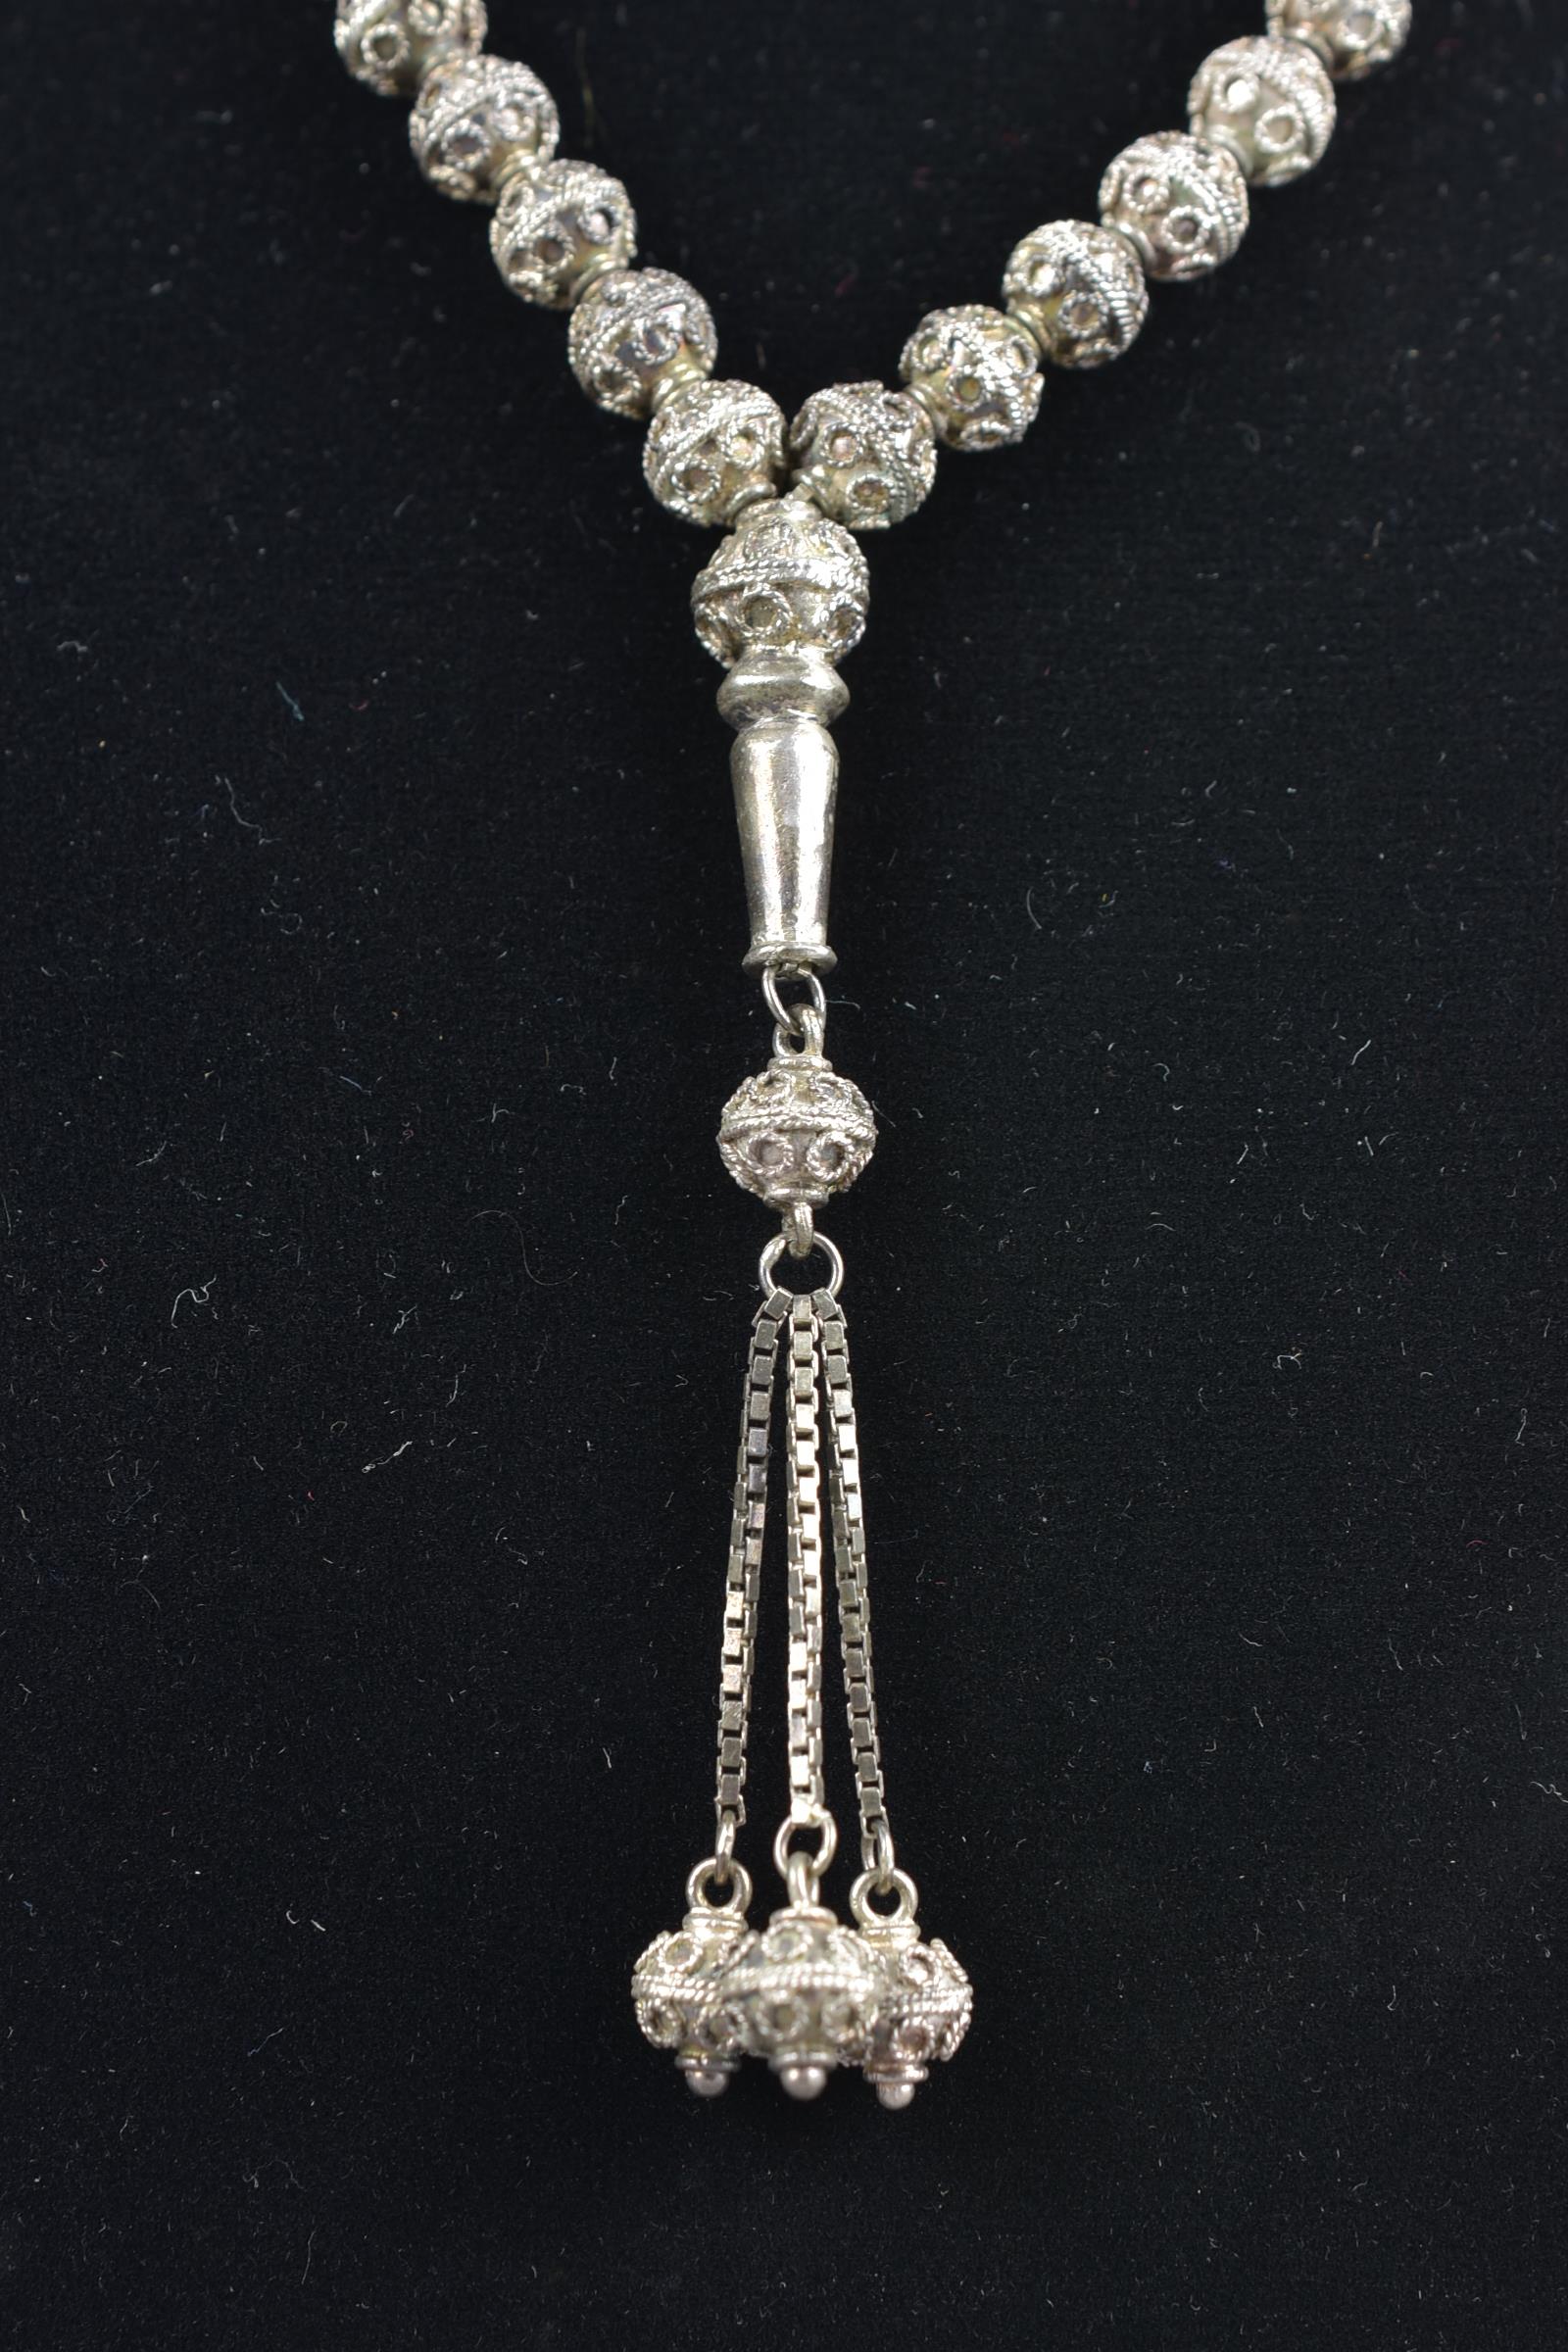 Islamic 19/20th century silver-coloured metal prayer bead necklace - Image 2 of 4